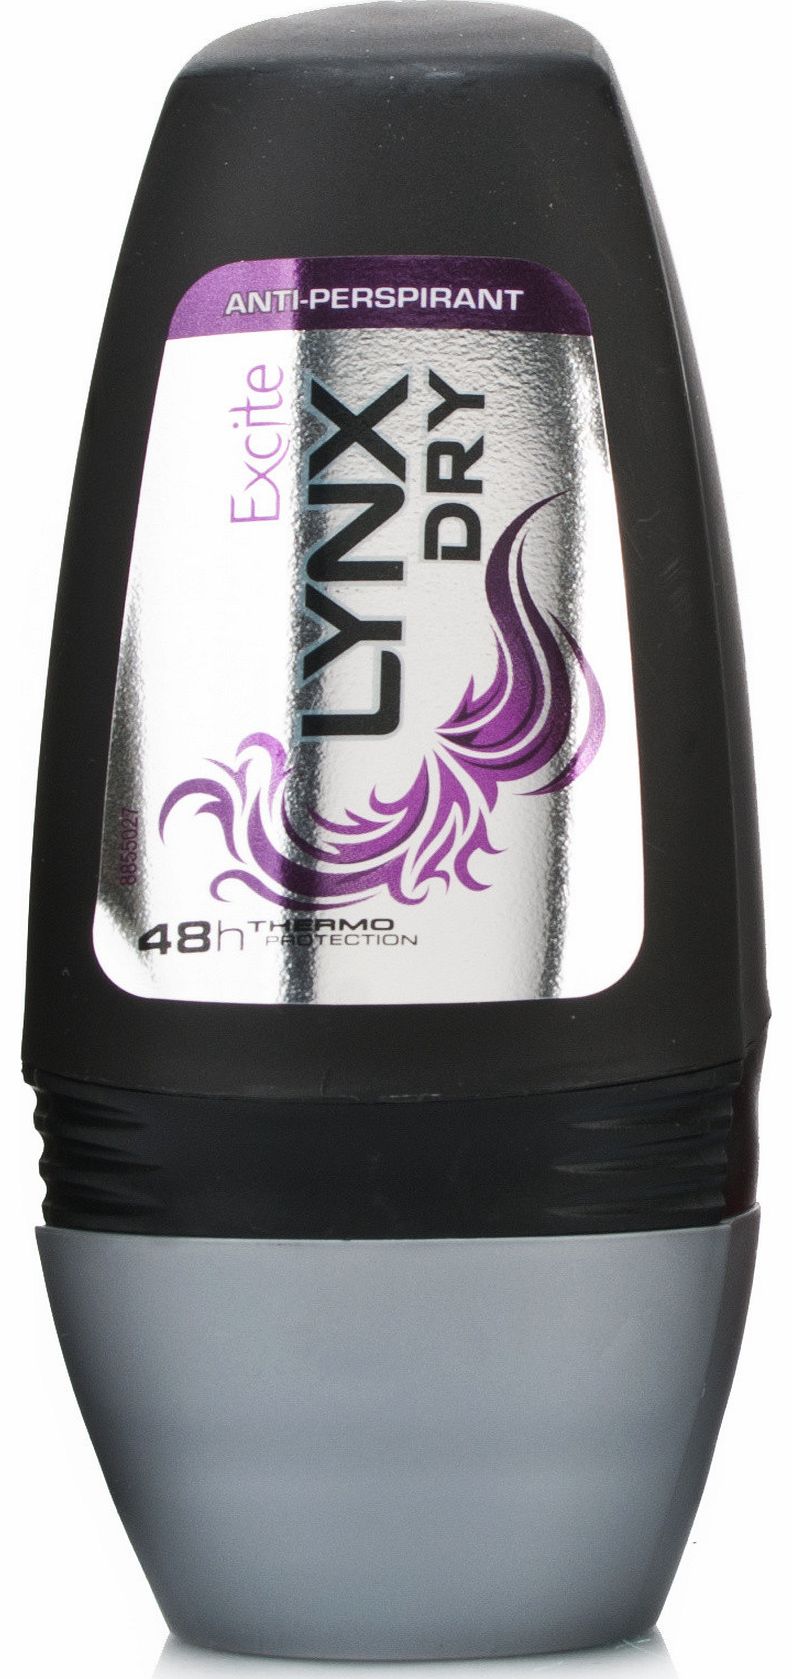 Dry Excite Anti-Perspirant Roll-On